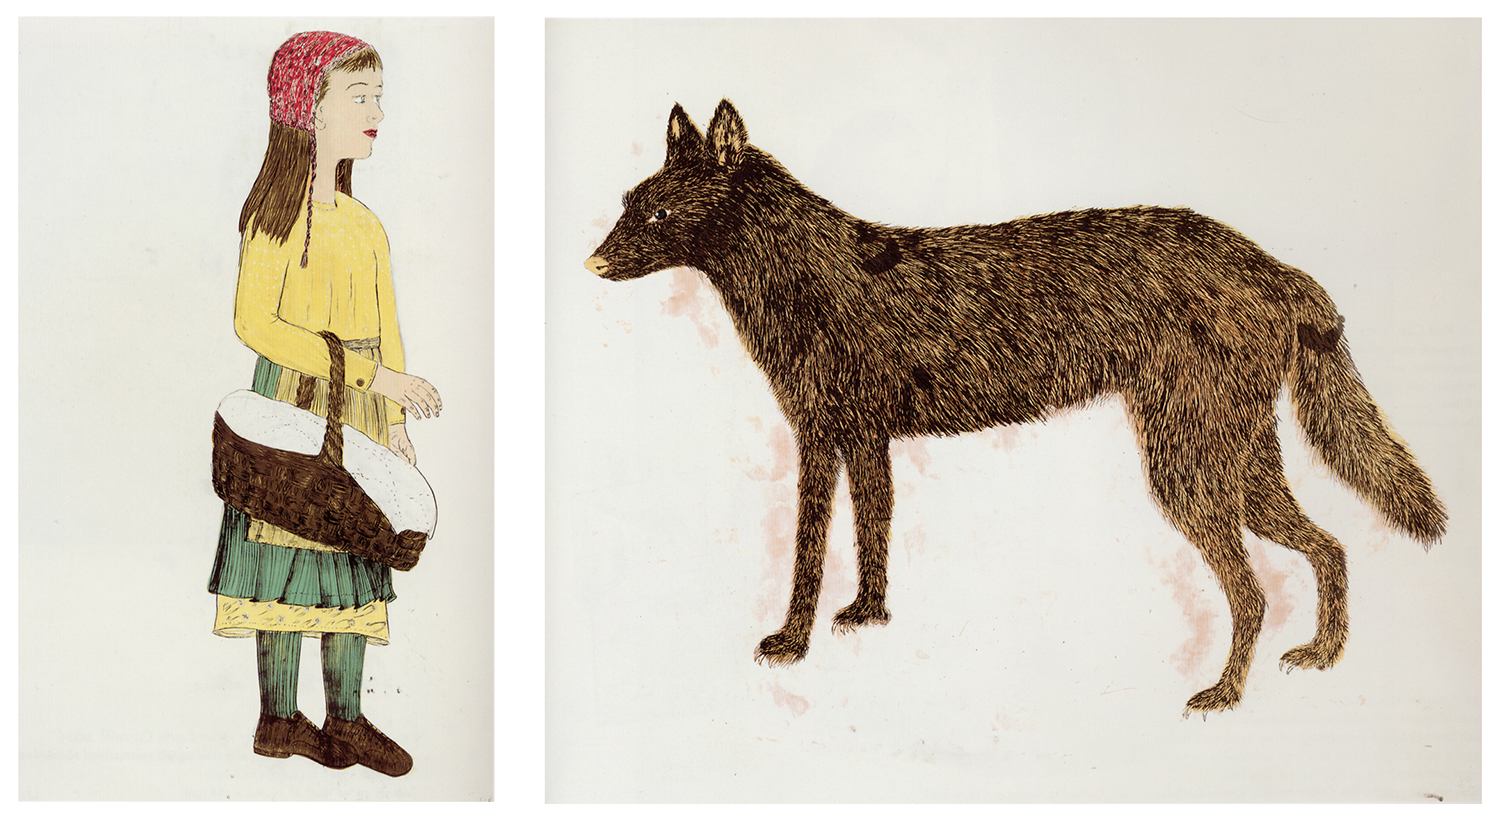 Companions (diptych), 2001, Lithograph in 11 colors, (Girl) 54 5/16 x 33 1/8 inches (138 x 84.1 cm) / (Wolf) 54 5/16 x 66 3/16 inches (138 x 168.1 cm), Edition of 26